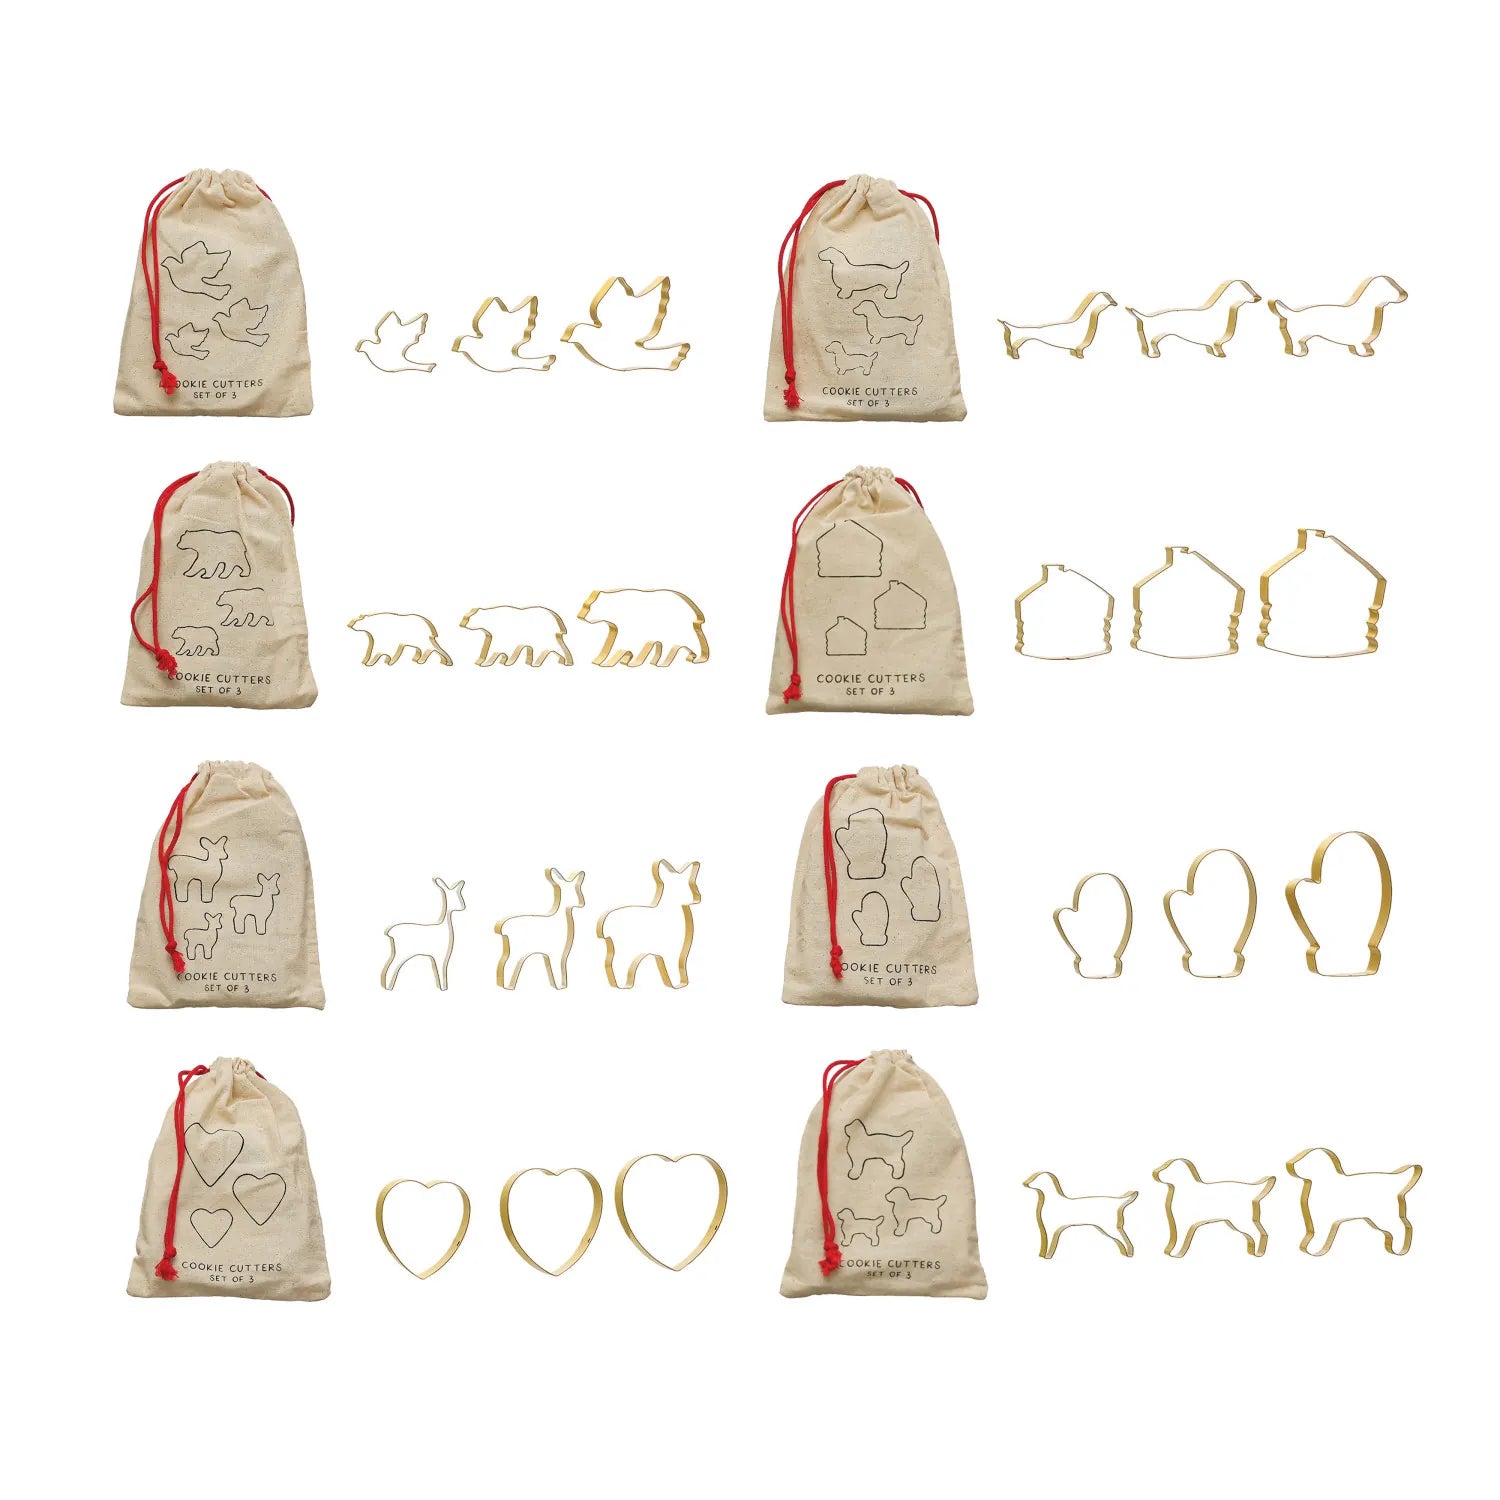 8 different styles of Christmas cookie cutters including reindeer and doves. 